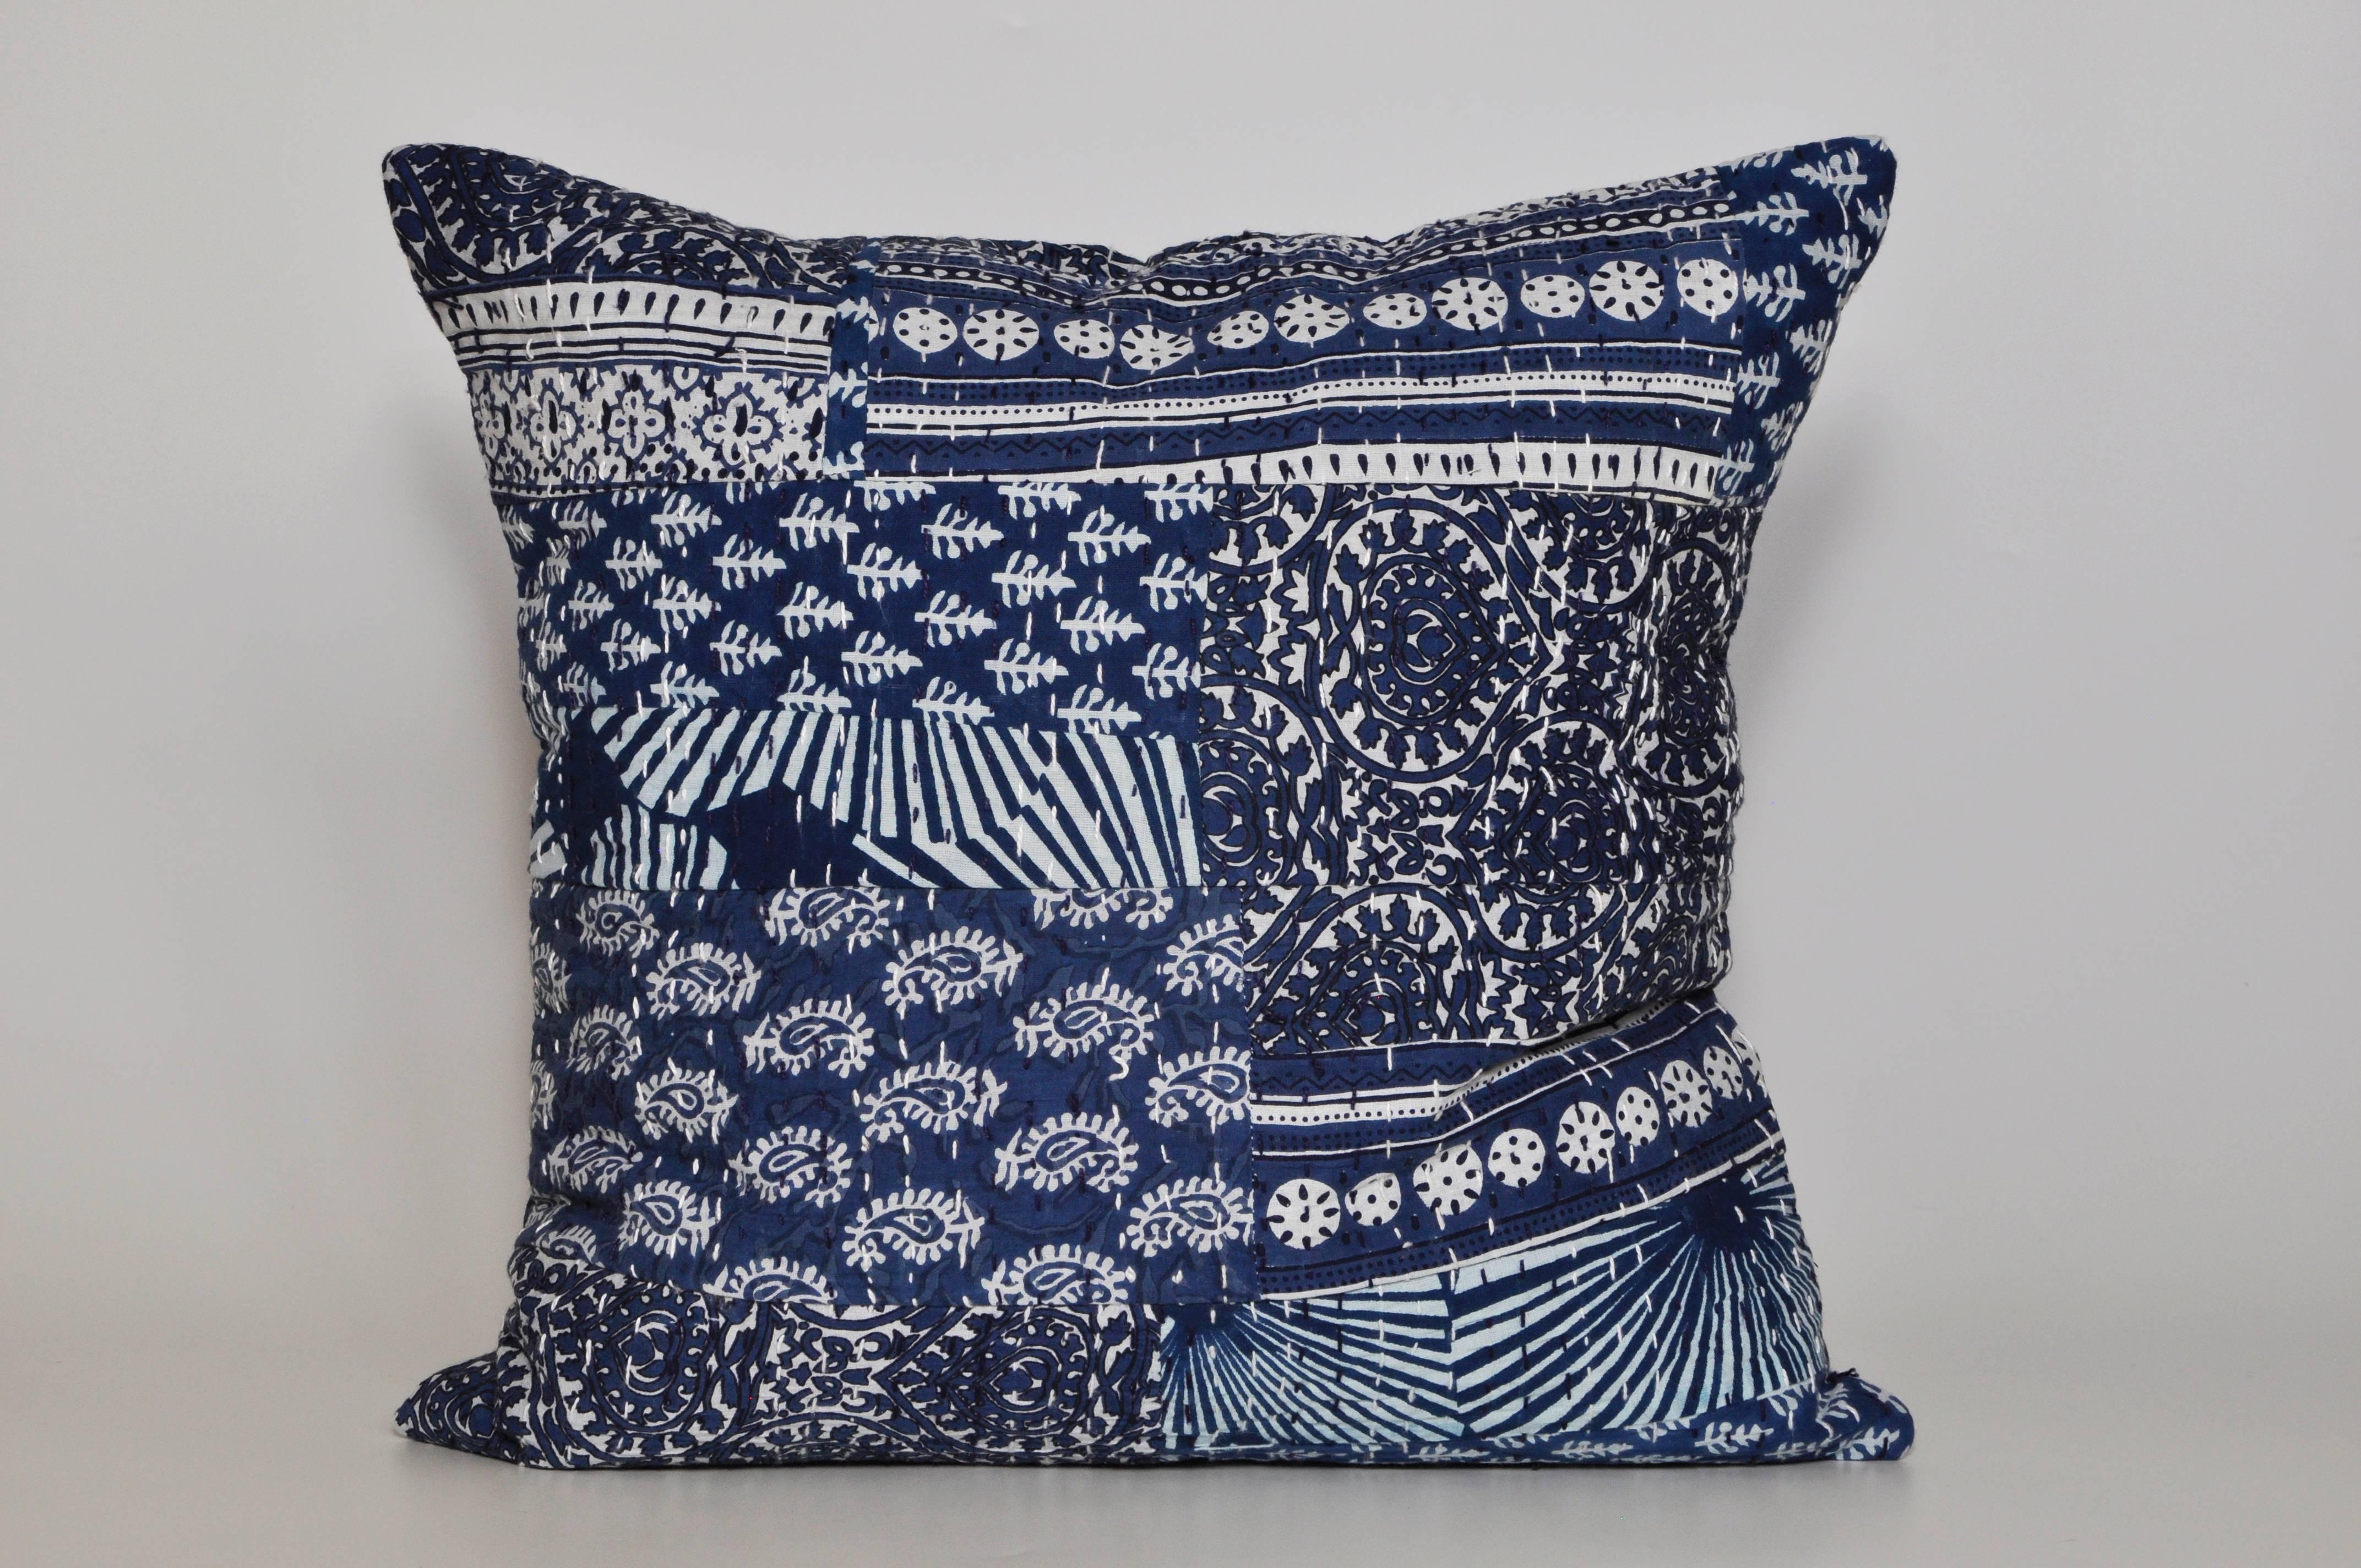 Hand-Crafted Vintage Indian Batik Kantha Indigo Patchwork with Irish Linen Cushion Pillow For Sale